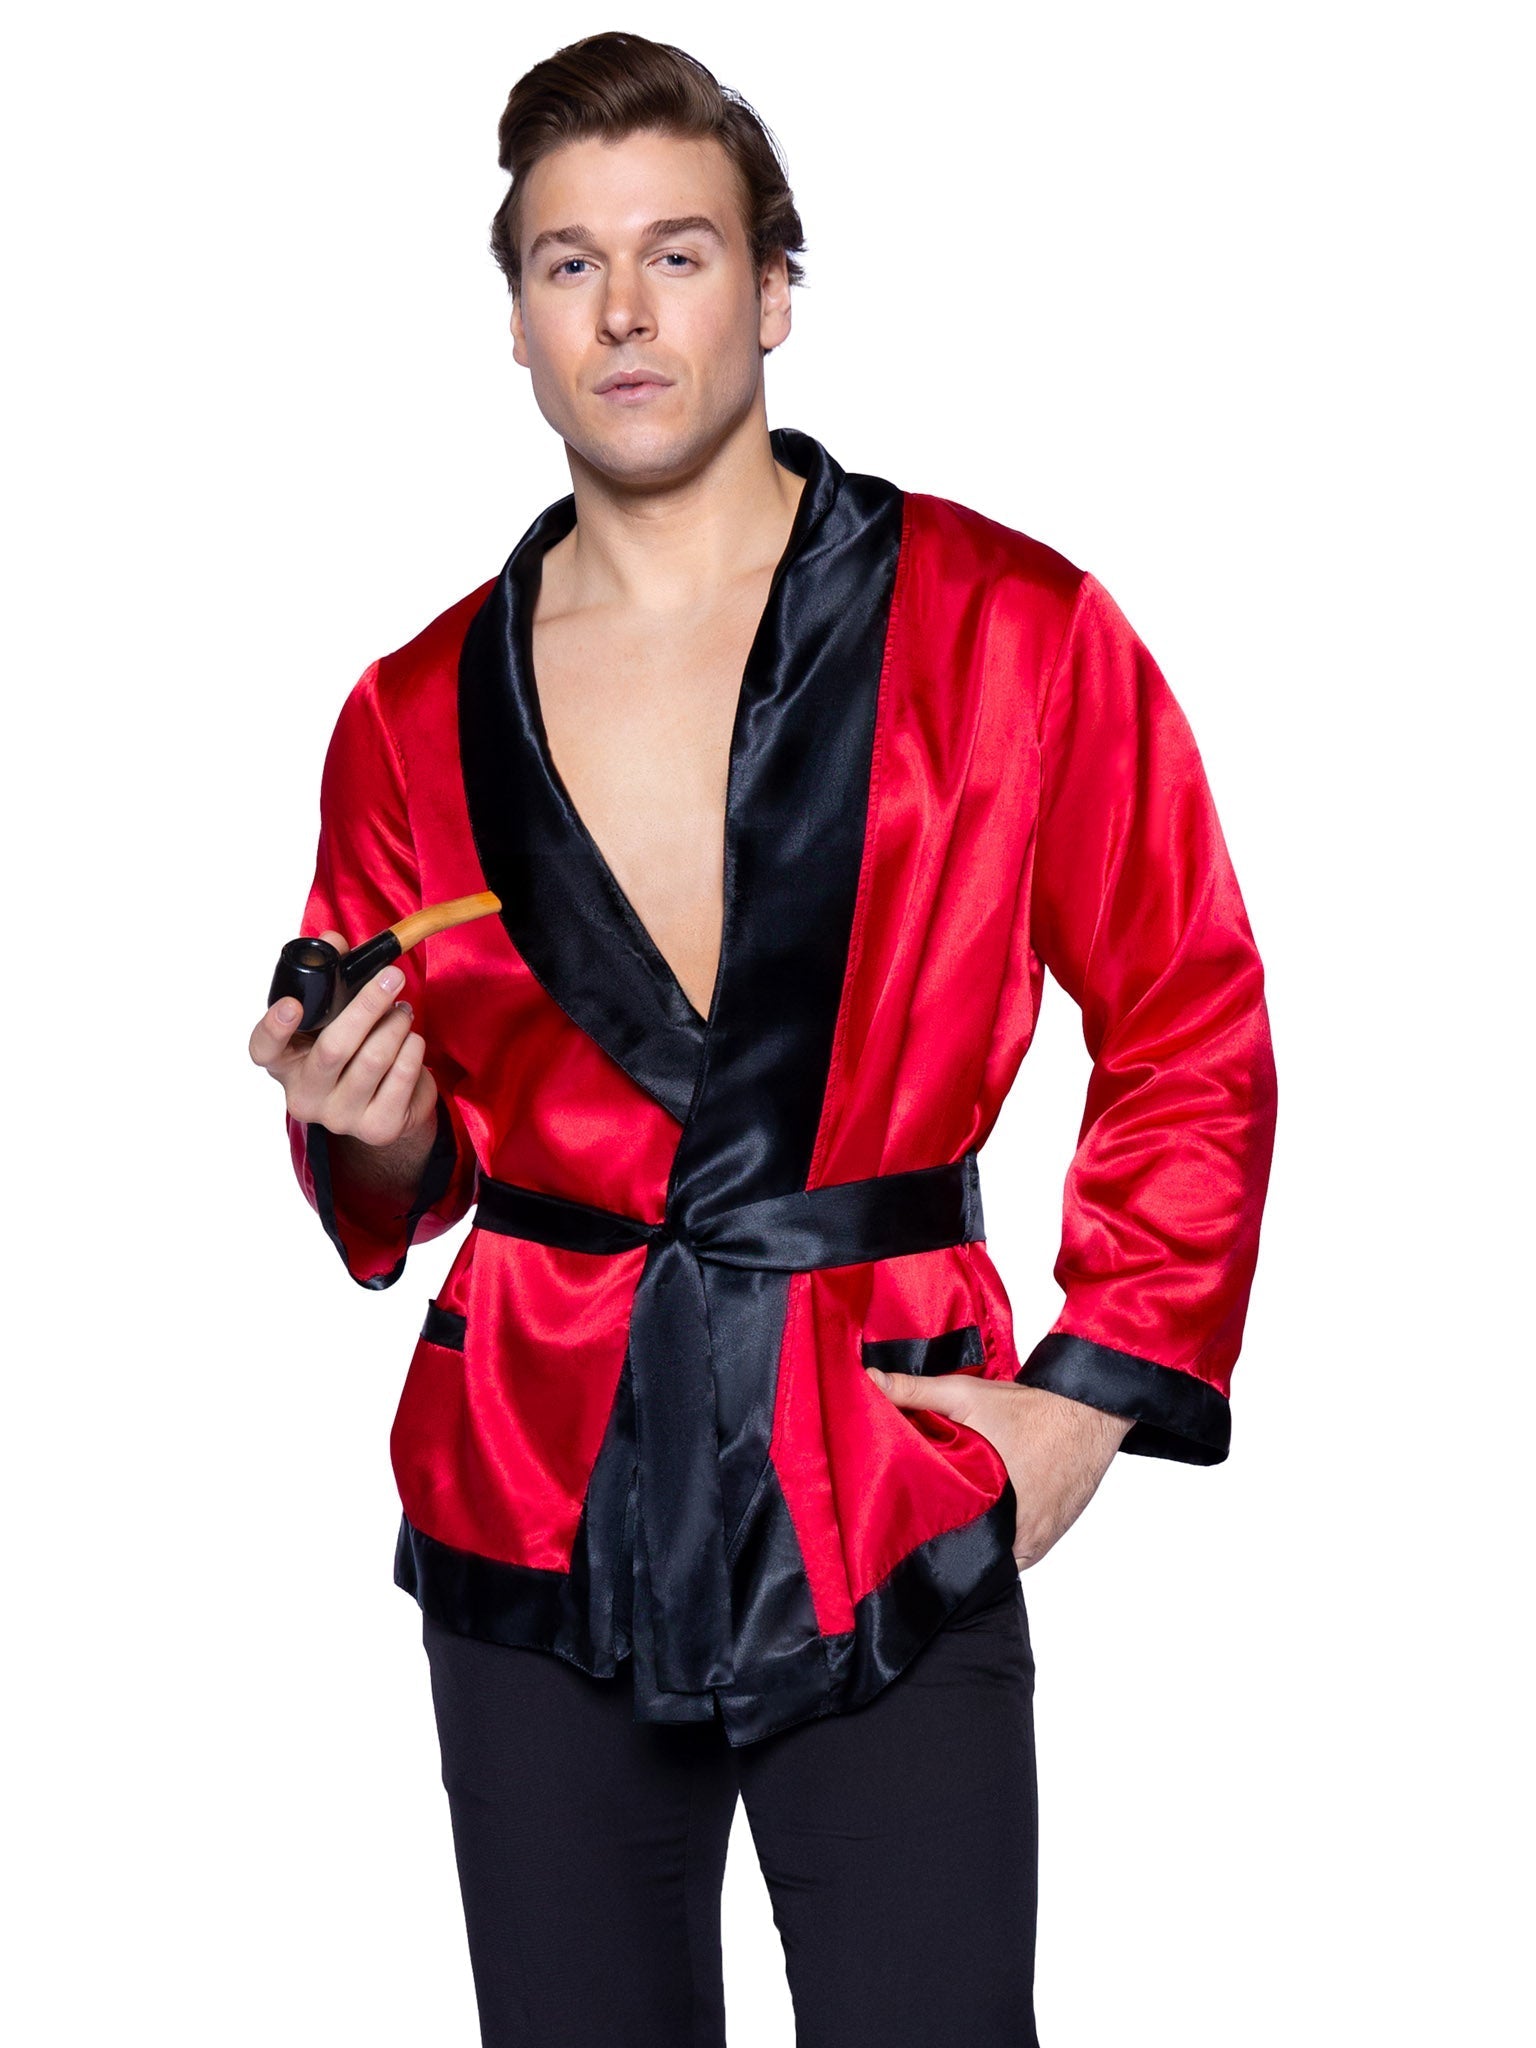 Bachelor Costume for Adults, Red and Black Robe